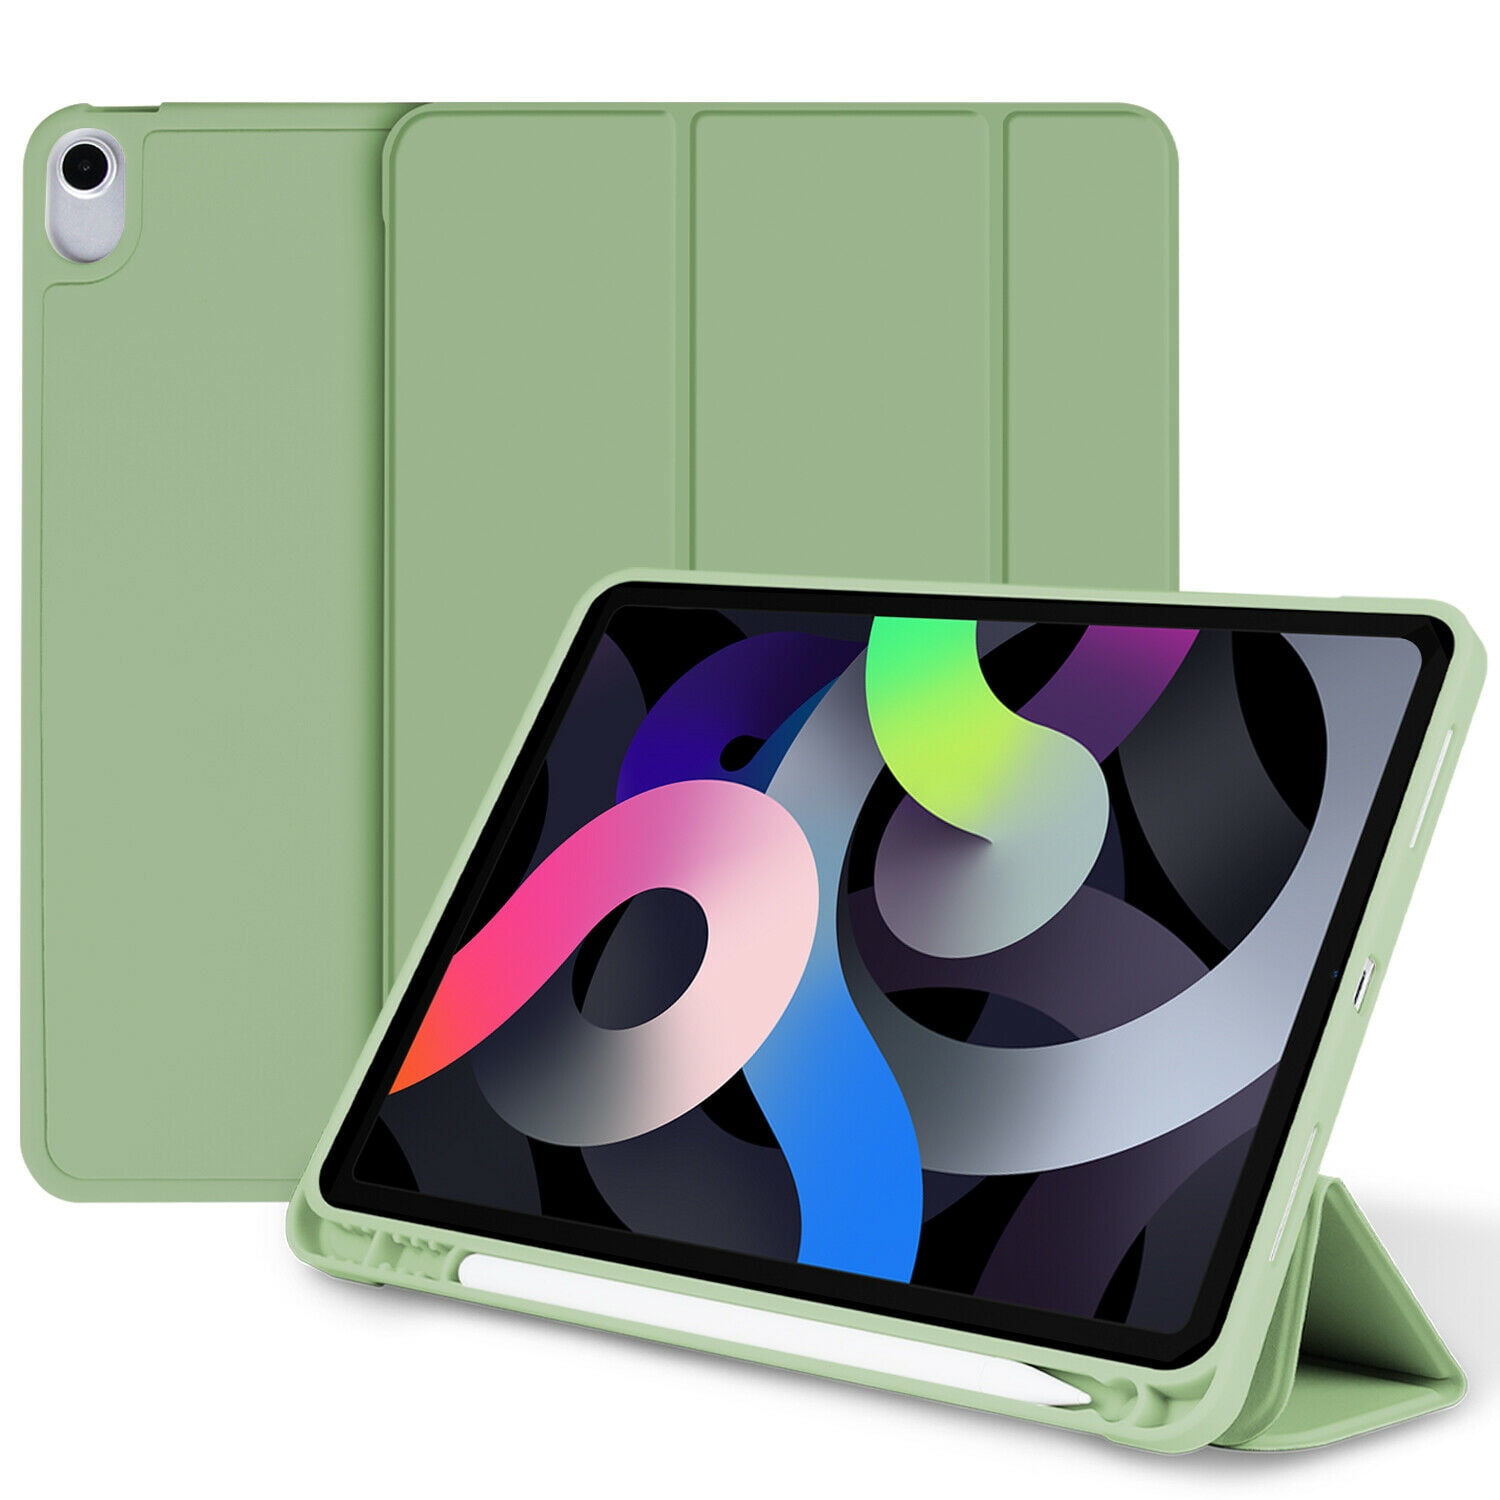 Multi-Angle Viewing Cover Auto Sleep/Wake for iPad Air 4th Generation Fintie Case for iPad Air 4 10.9 Inch 2020 with Pencil Holder with Pocket Supports Pencil 2nd Gen Charging Emerald Marble